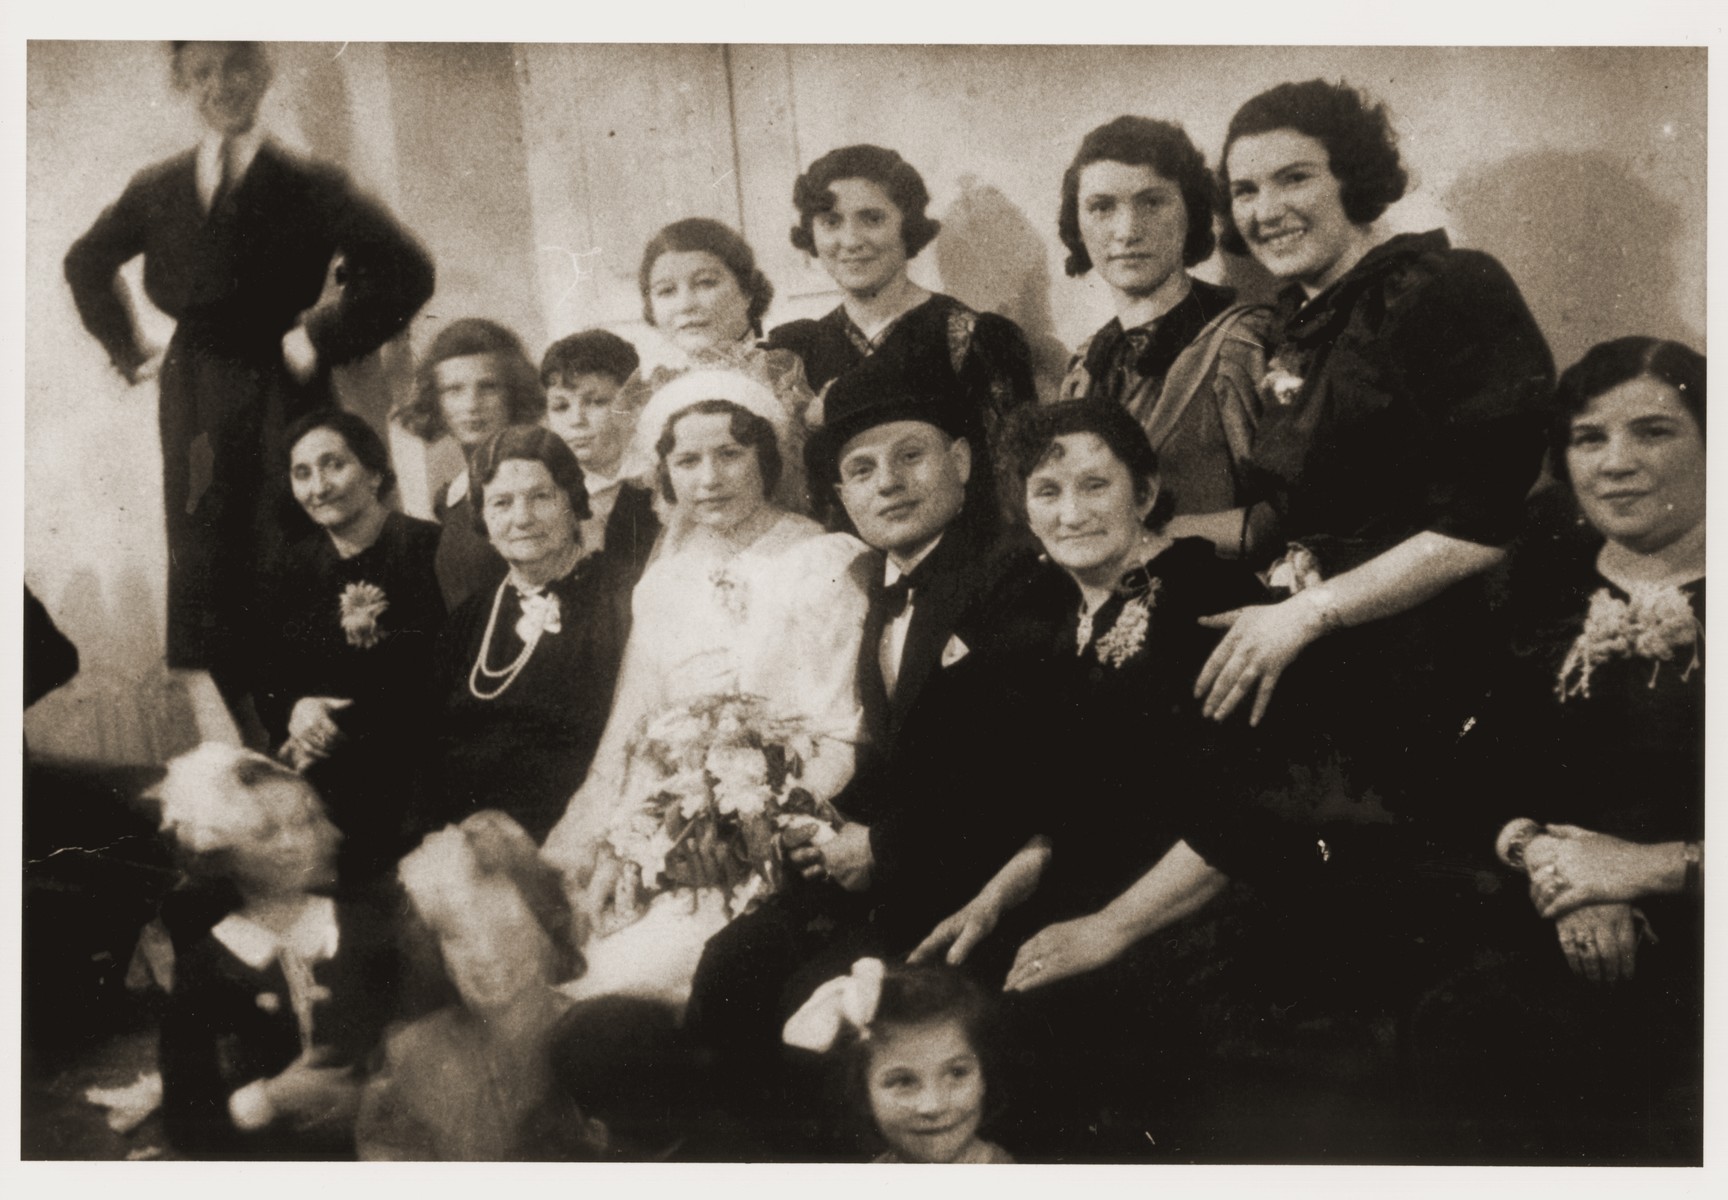 Group portrait of family and friends at the wedding of Bracha Broncia Rotsztajn and Mr. Kratka.  

Standing on the far left is Aaron Rotsztajn (the donor's paternal uncle, who escaped Poland to Palestine in 1941).  In the second row, second from the left, is Roma Rotsztajn (the donor), her brother, Dawid; an aunt; Bracha Rotsztajn; Rozia Rotsztajn and Ela Rotsztajn.  In the front row, second from the left is Malka Rotsztajn (the donor's great grandmother); Bracha and her husband and Dwora (Rozmaryn) Rotsztajn (the donor's grandmother).  Aaron and Roma were the only survivors of this group.